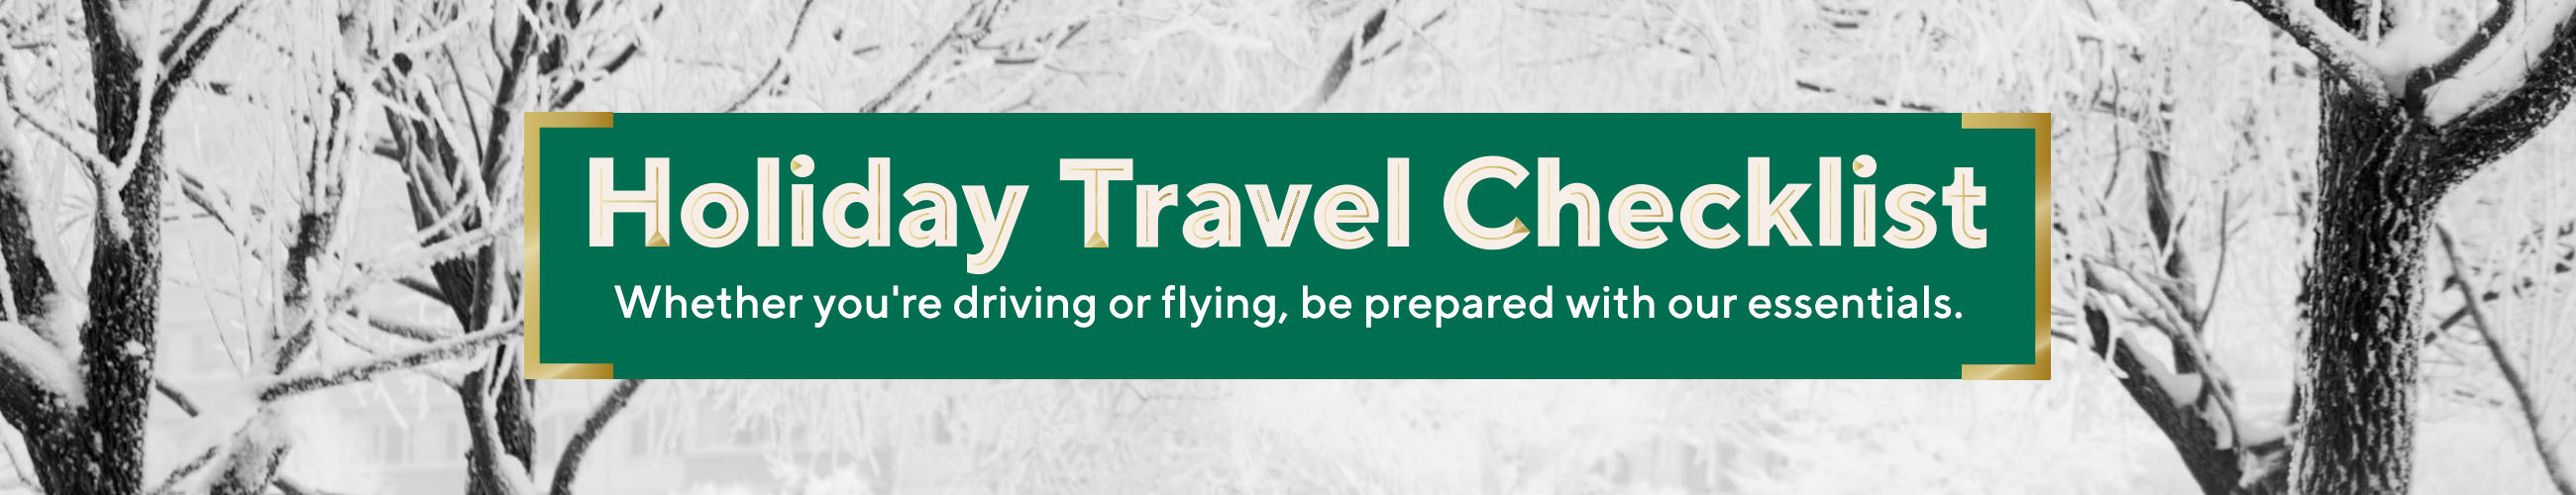 Holiday Travel Checklist  Whether you're driving or flying, be prepared with our essentials.